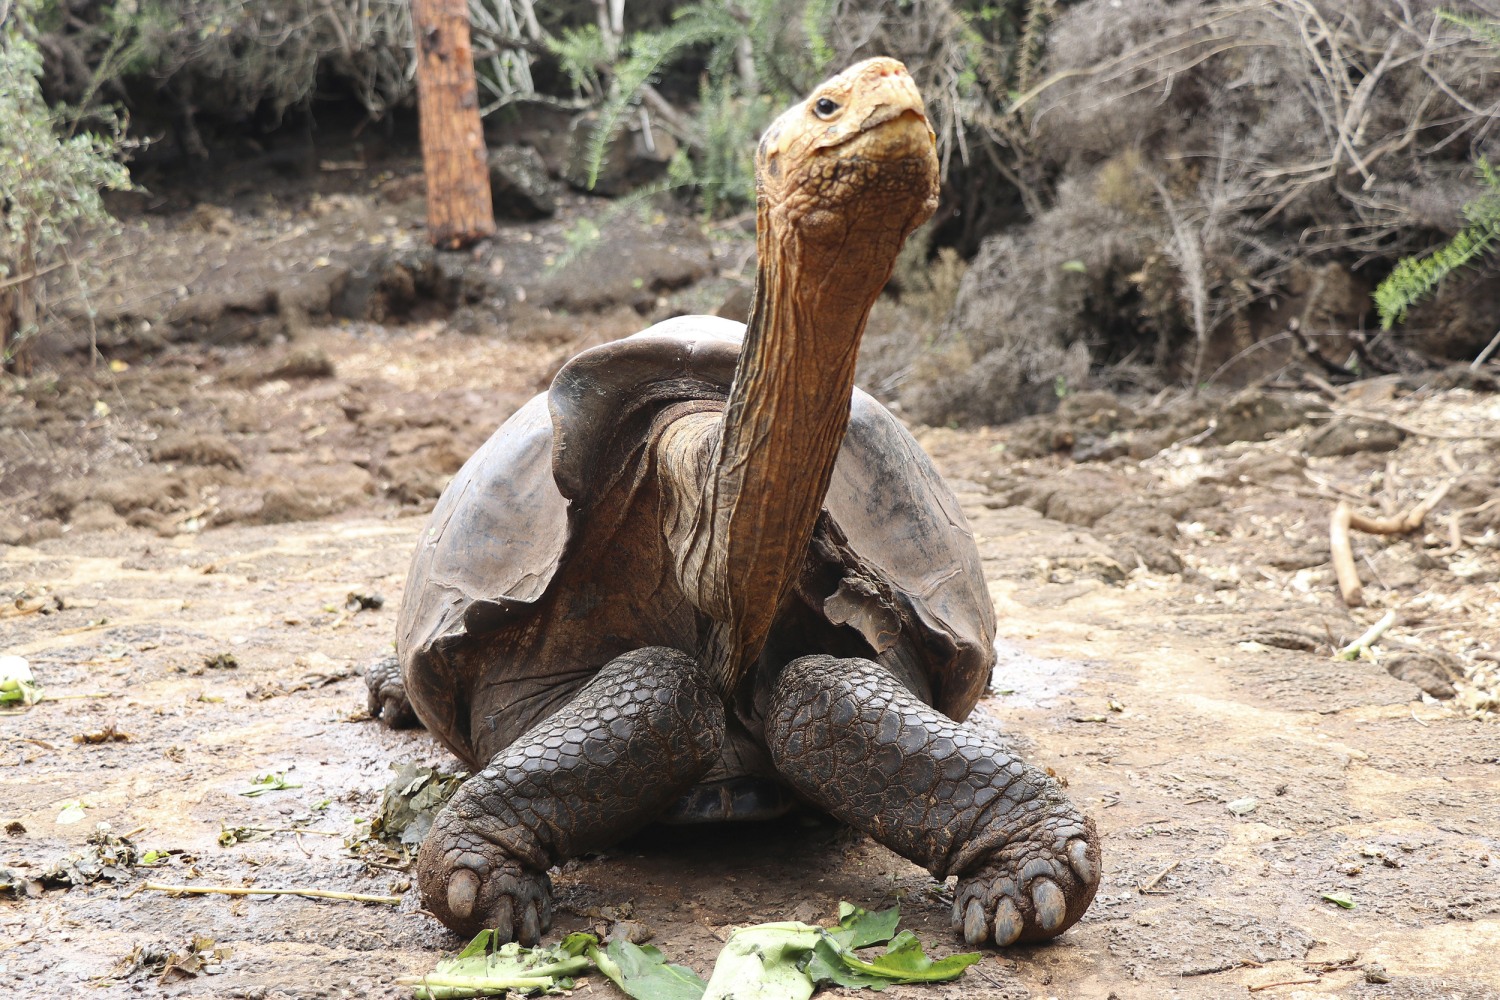 Giant tortoise who helped save species retires in Galapagos Islands